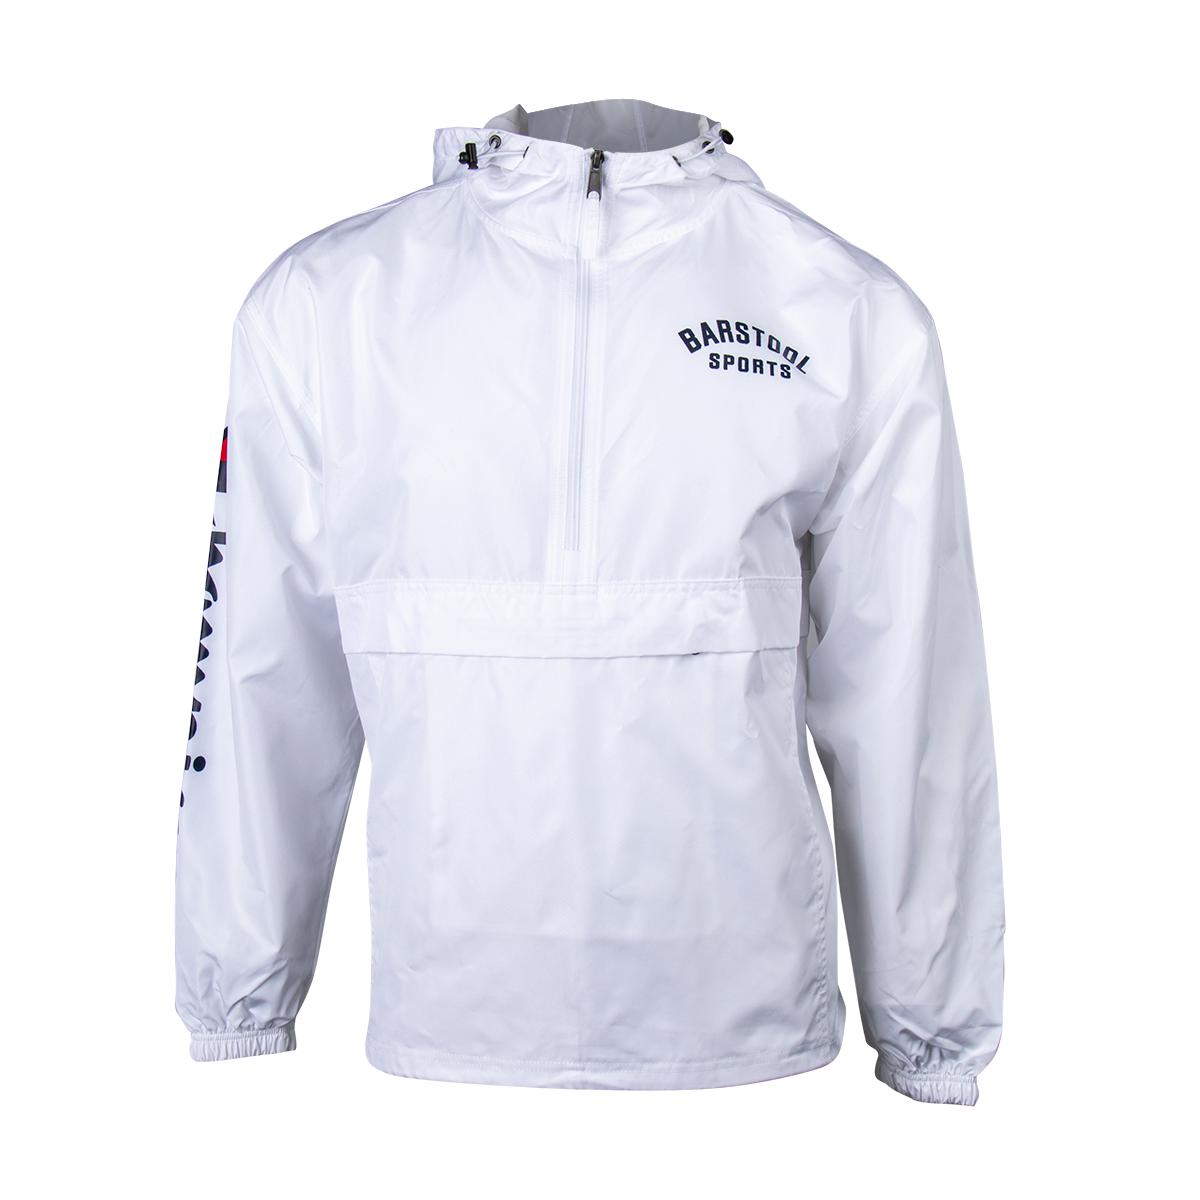 Barstool Sports Champion Packable Jacket-Jackets-Barstool Sports-S-White-Barstool Sports